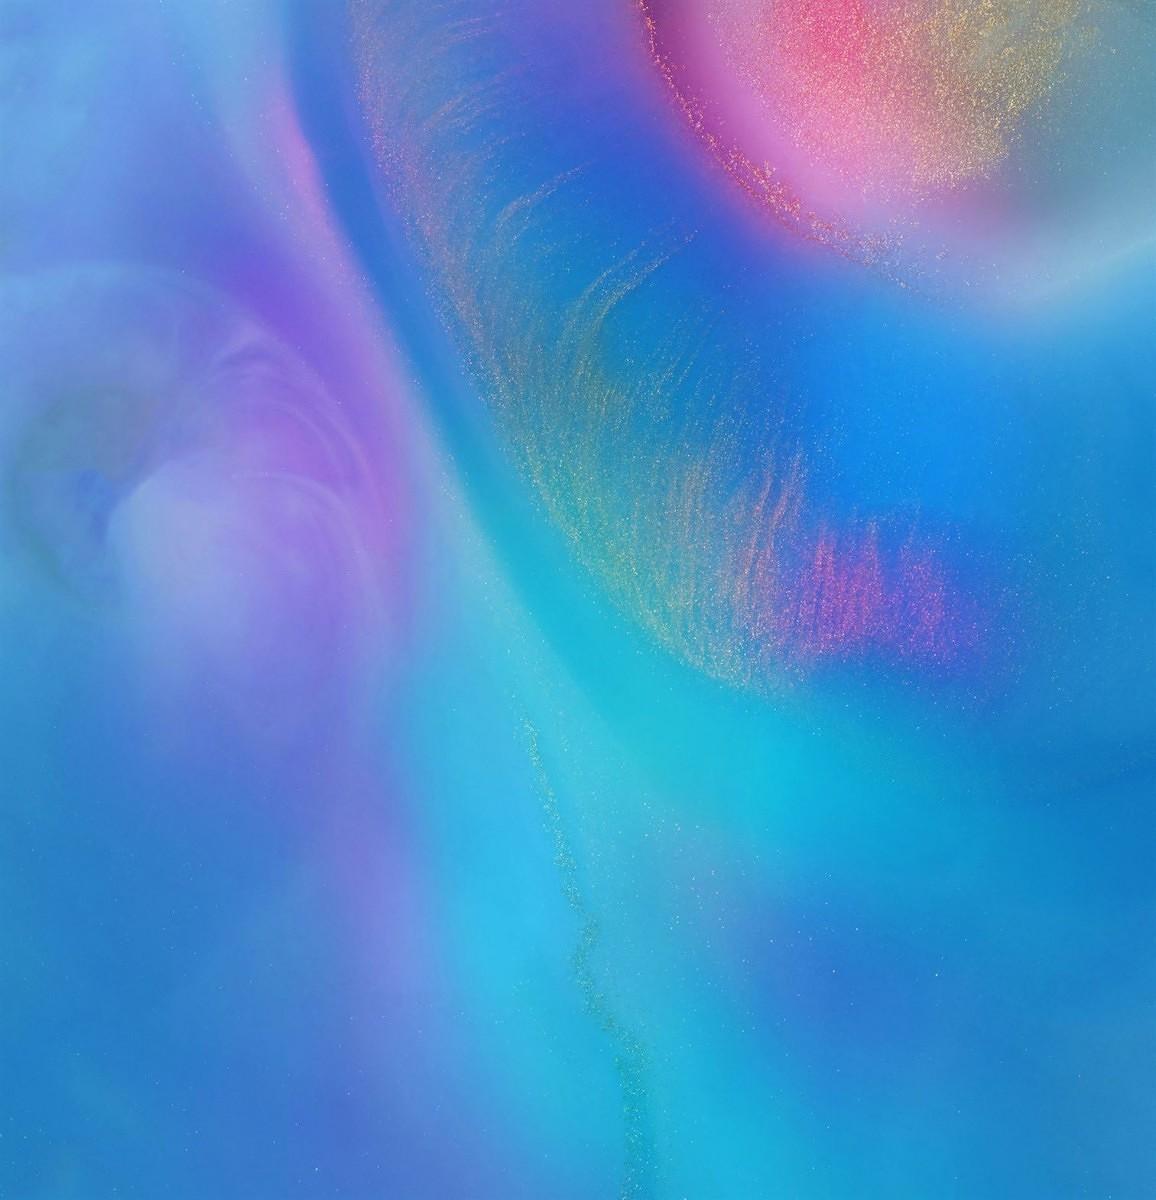 Download: Huawei Mate 20 Wallpaper, Live Wallpaper, and Themes